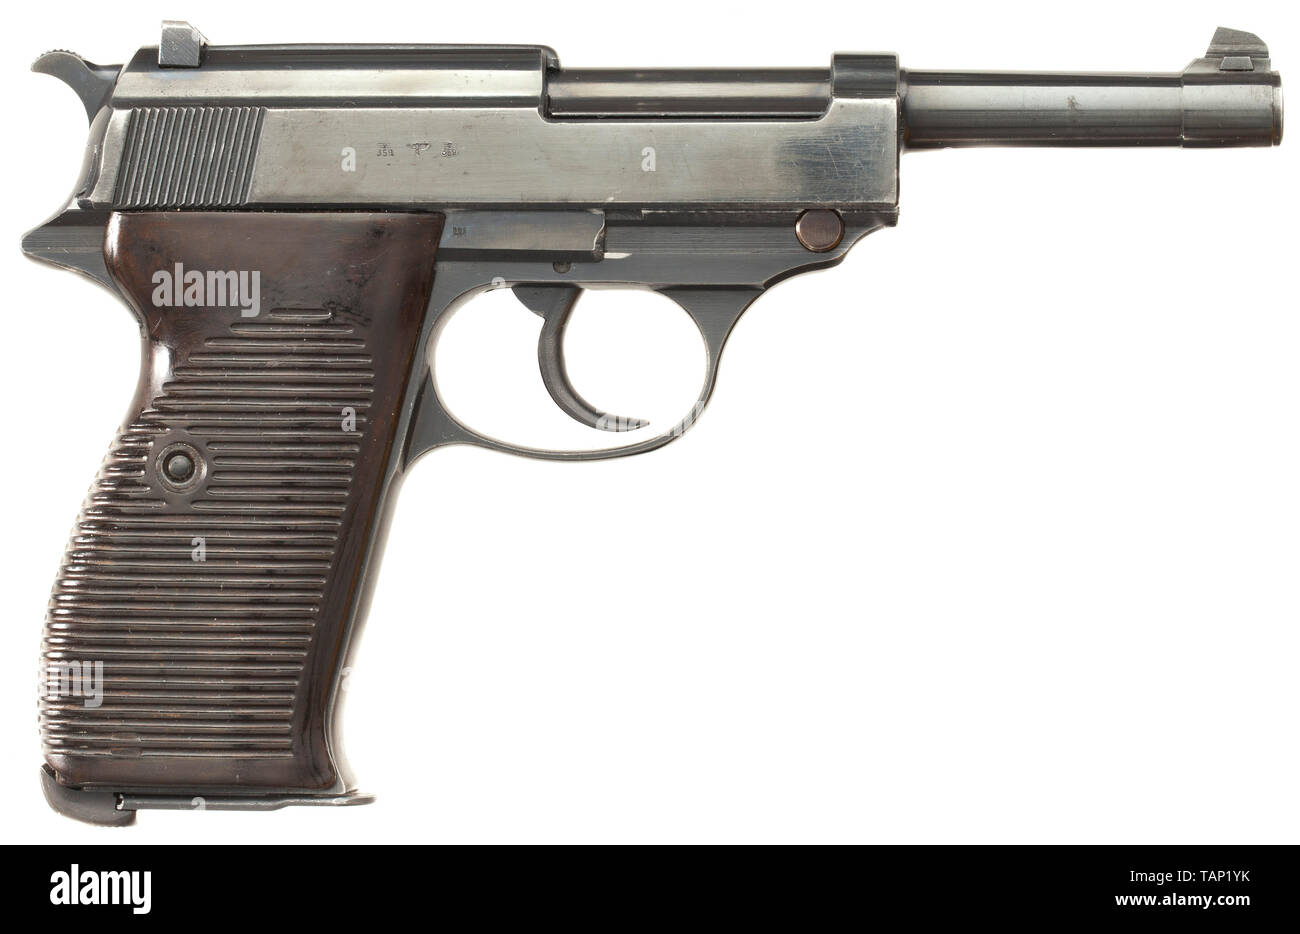 A Walther P 38, code 'ac 40' (40 added), Wehrmacht 9 mm calibre Parabellum, no. 4468a. Matching numbers. Mirror-like bore. Acceptance mark eagle/359 on all parts. Complete original highly polished bluing with weak usage marks. Dark brown Bakelite grip panels. Ulm magazine. A rare, early collector's item from November 1940 production comprising only circa 5.700 weapons with the year '40' engraved after the bluing. A collector's item in very good to mint condition. Erwerbsscheinpflichtig. historic, historical, 20th century, Editorial-Use-Only Stock Photo